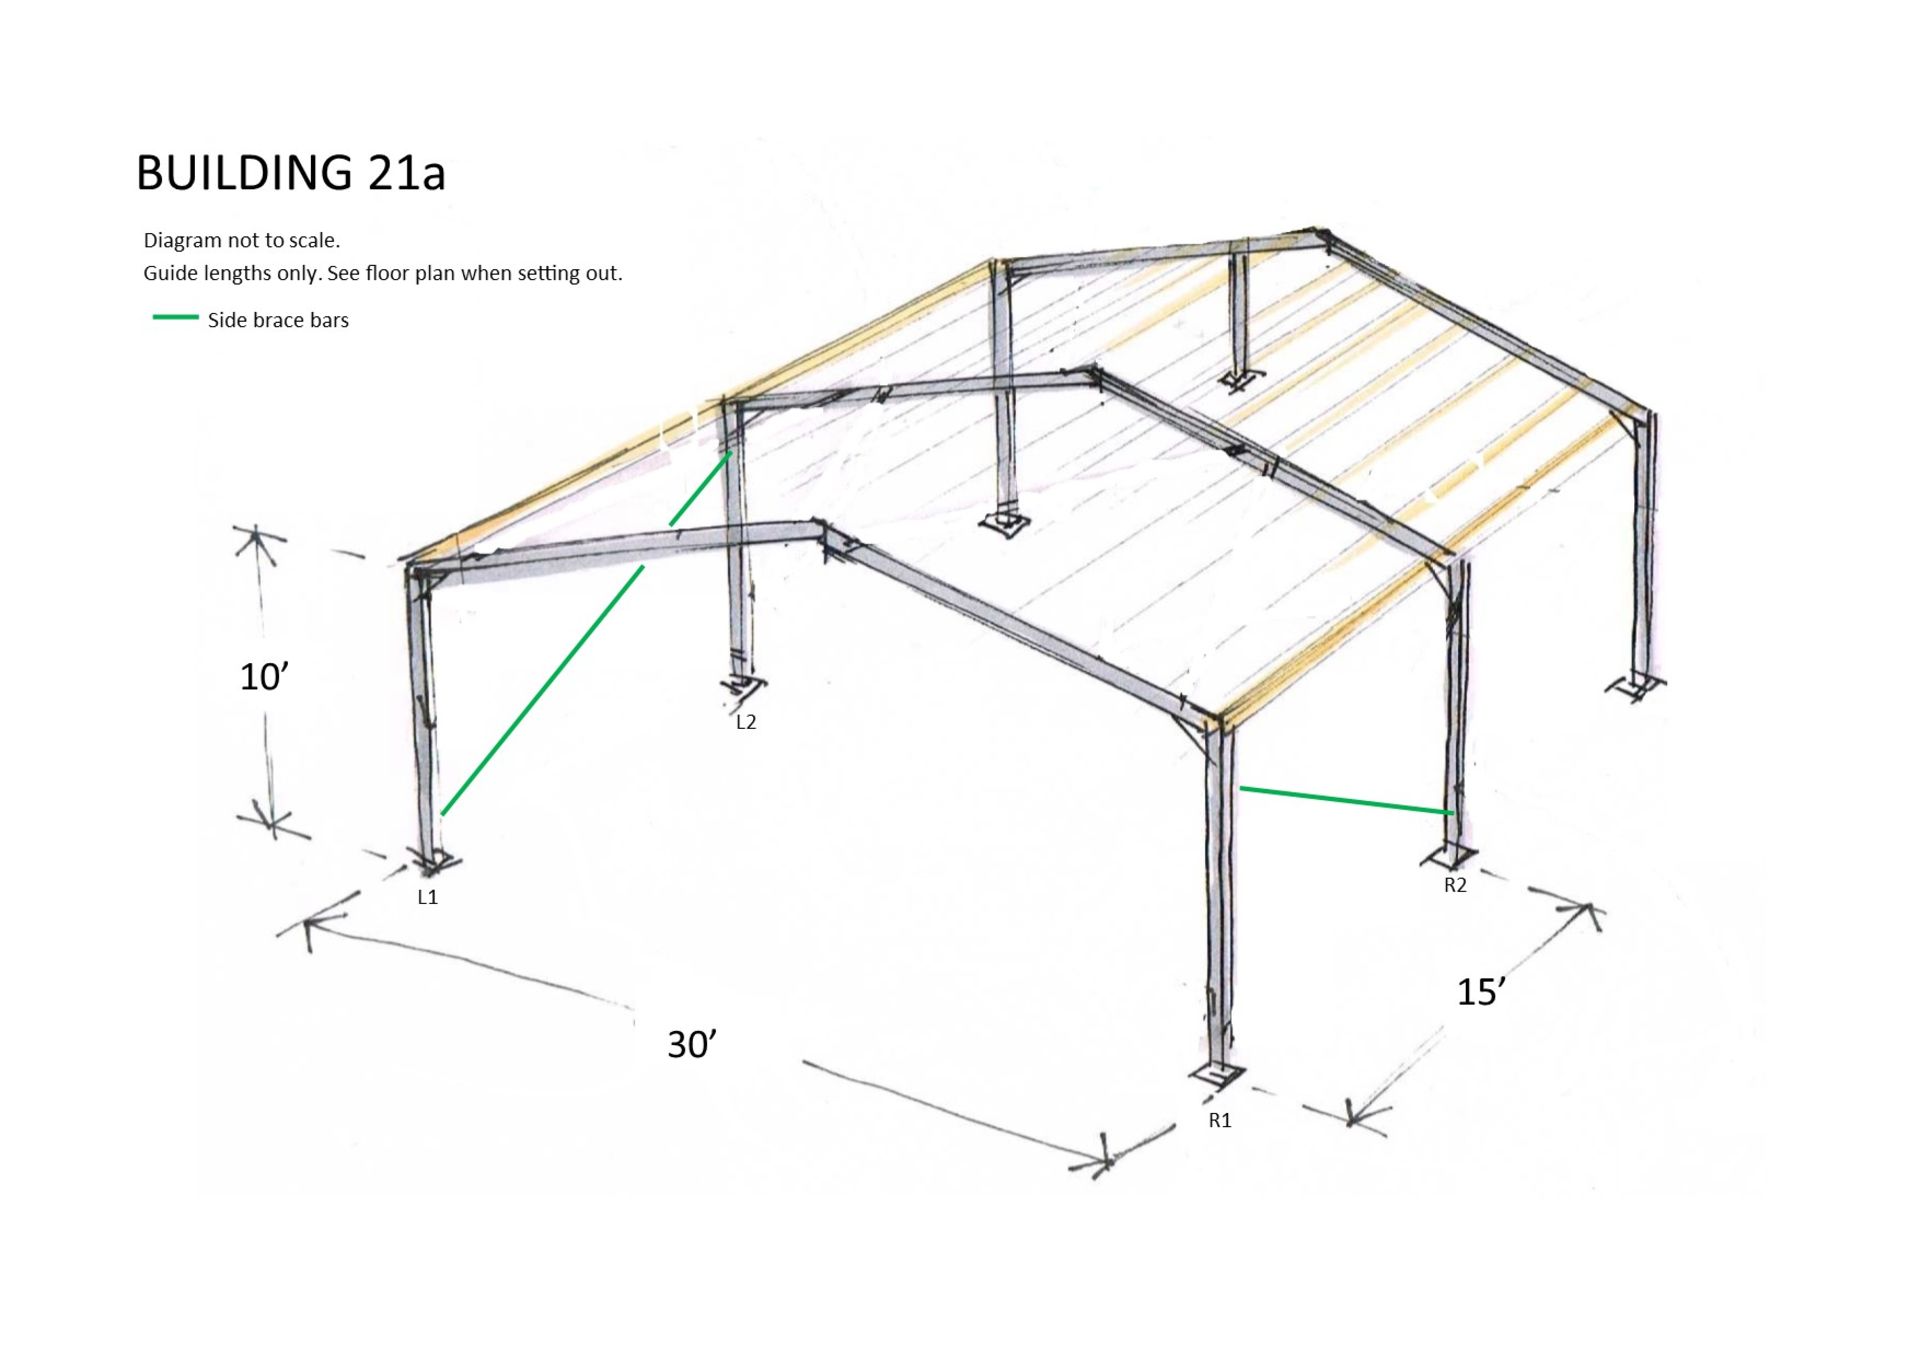 Steel framed building 30ft long x 30 ft wide x 10 ft @ eaves 12 .5 deg roof pitch purlins - Image 8 of 8